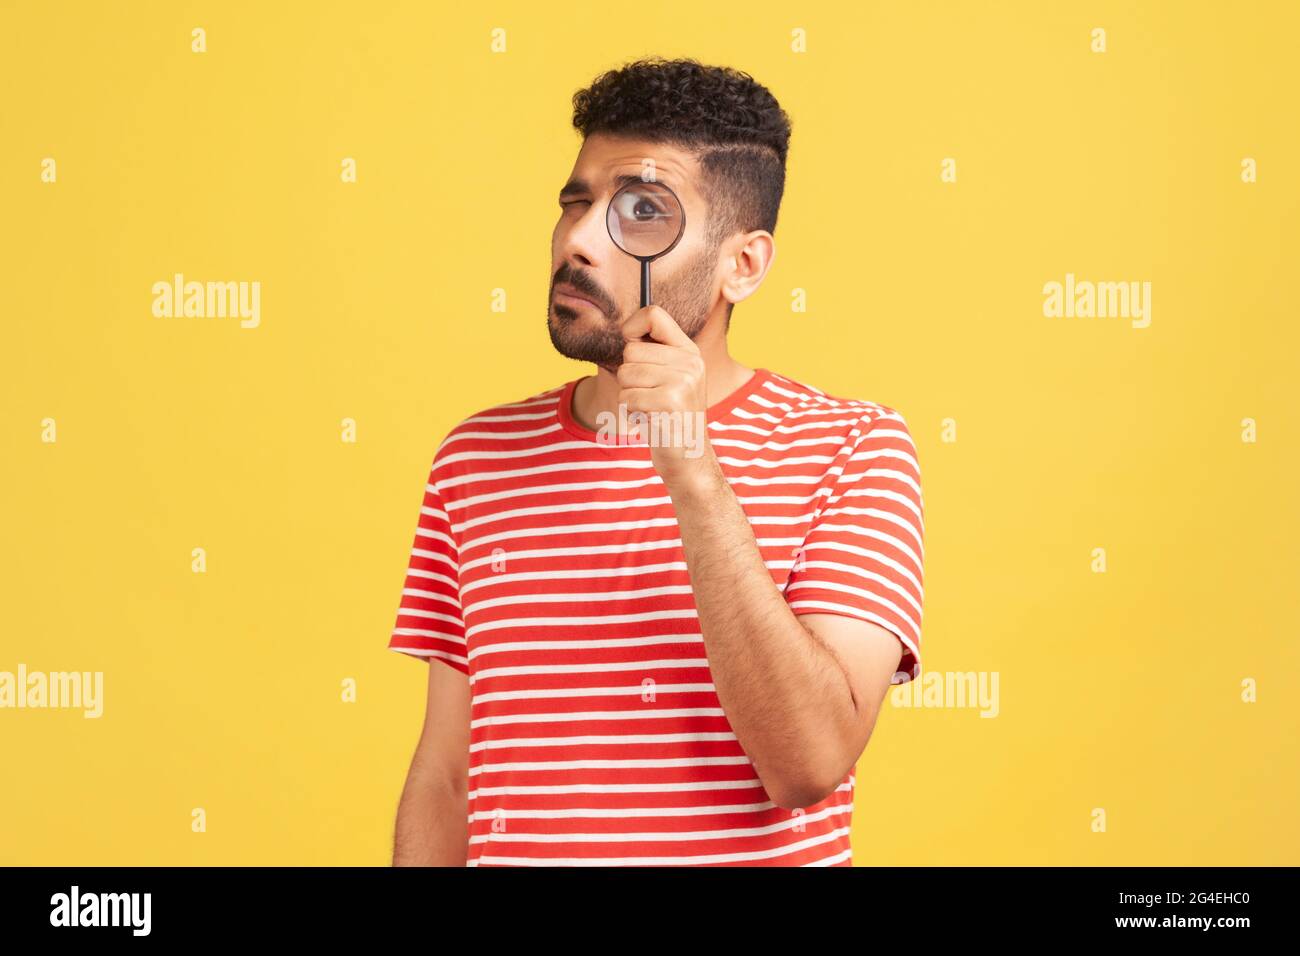 Serious bearded man in red striped t-shirt standing, holding magnifying glass and looking at camera with big zoom eye, verifying authenticity Stock Photo